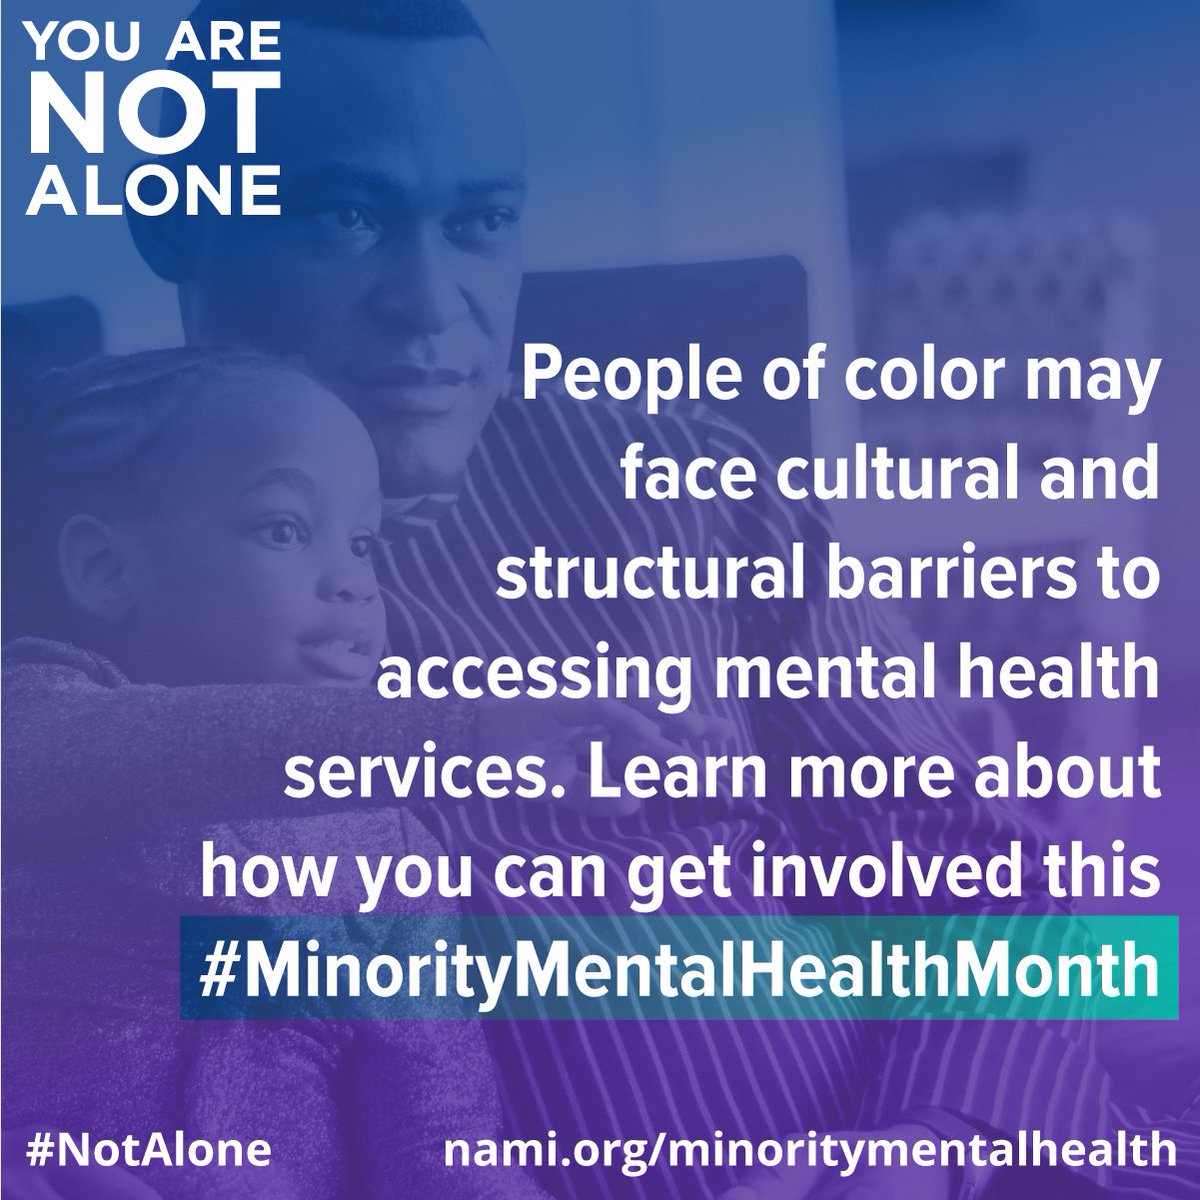 Cultural and structural barriers DO exist when the discussion of mental health access takes place.

Learn how you can help make changes at nami.org/minoritymental…

#MinorityMentalHealth #NotAlone #YouMatter #CulturalBarriers #MentalHealth